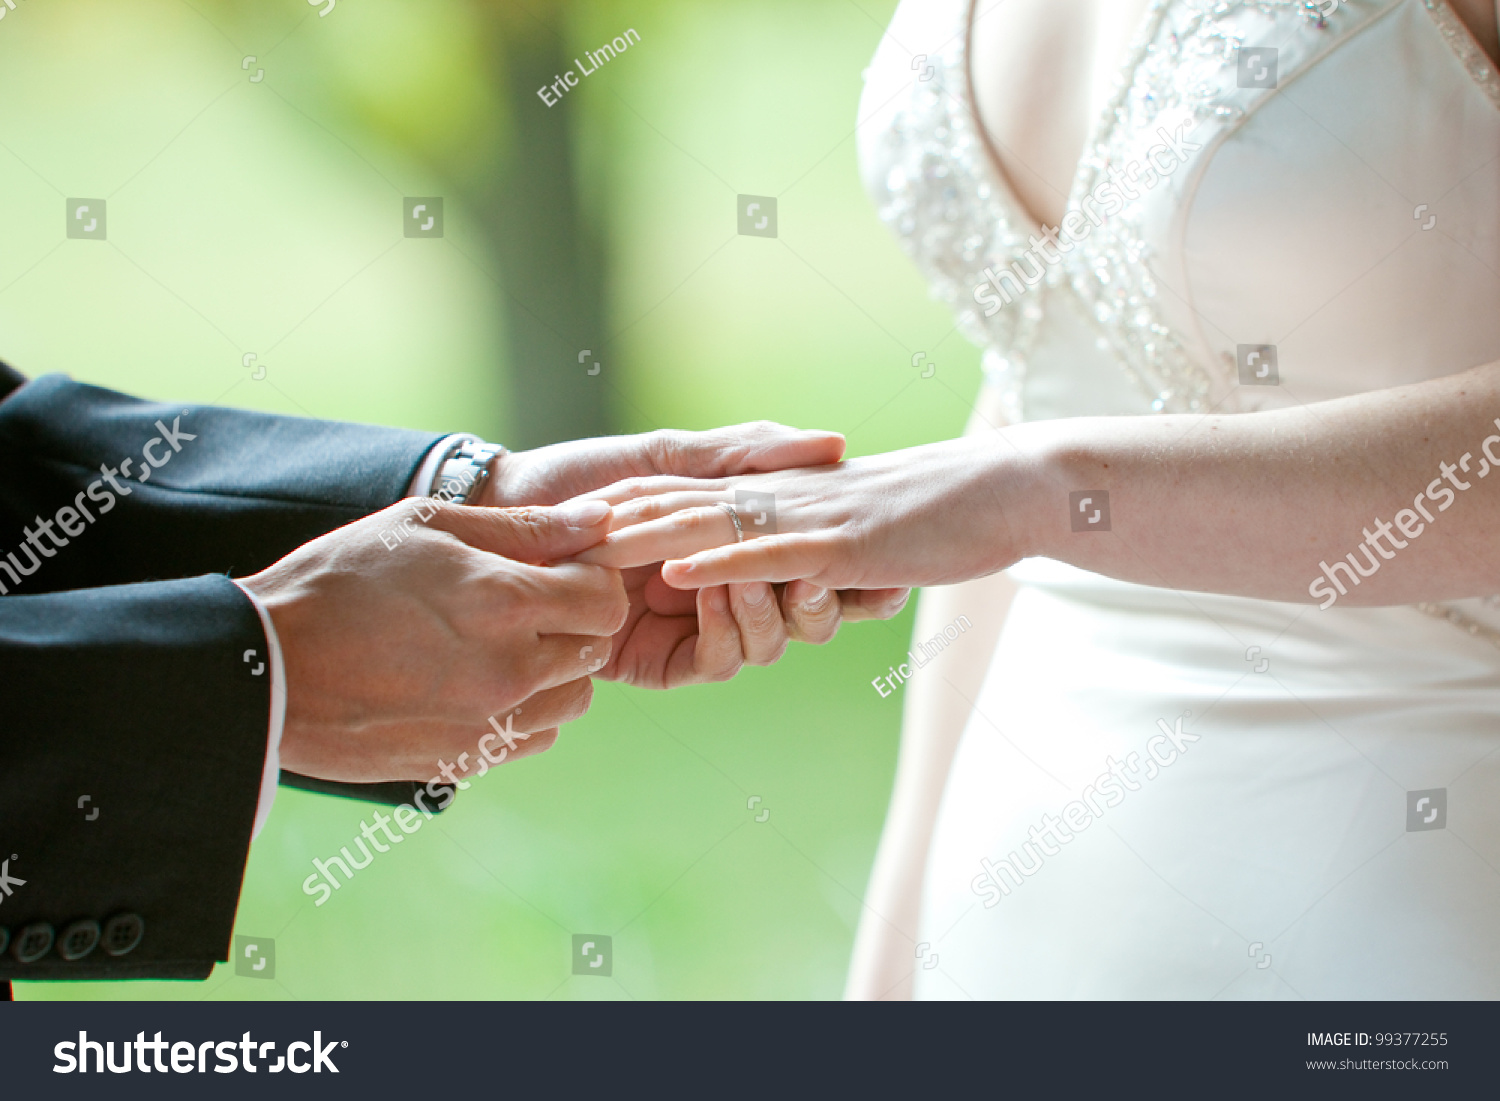 A Man Putting The Wedding Ring On His Brides Finger During A Ceremony